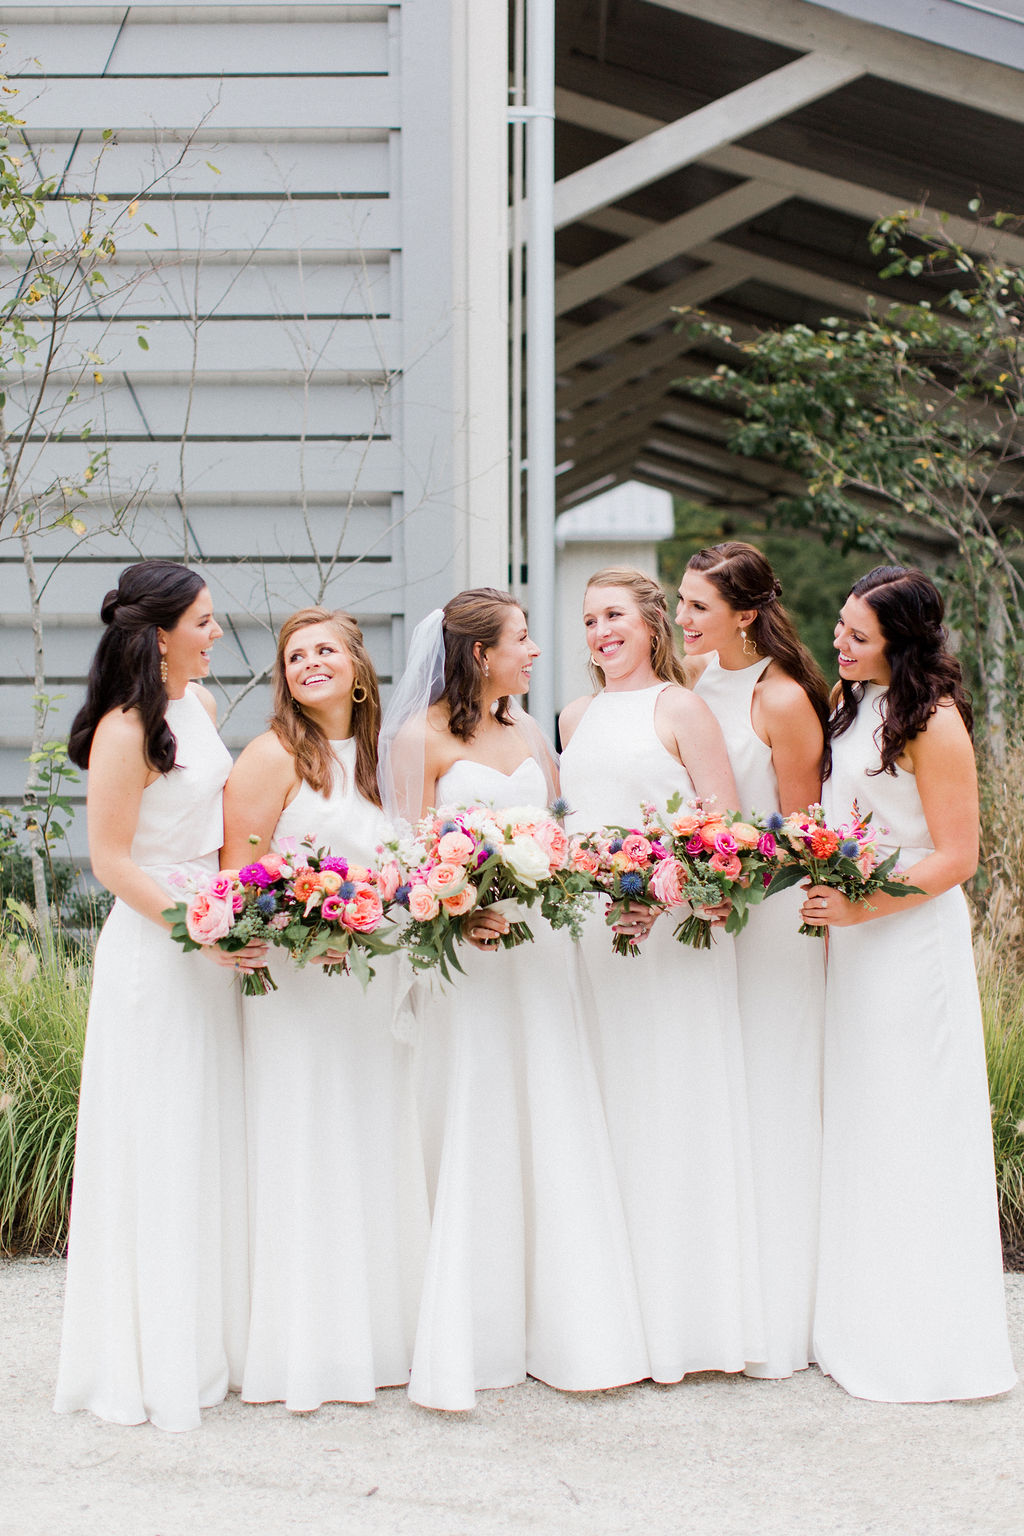 Karen Willis Holmes Kitty Nina Gown photo by Alisandra Photography Image shows Bride with Bridemaids